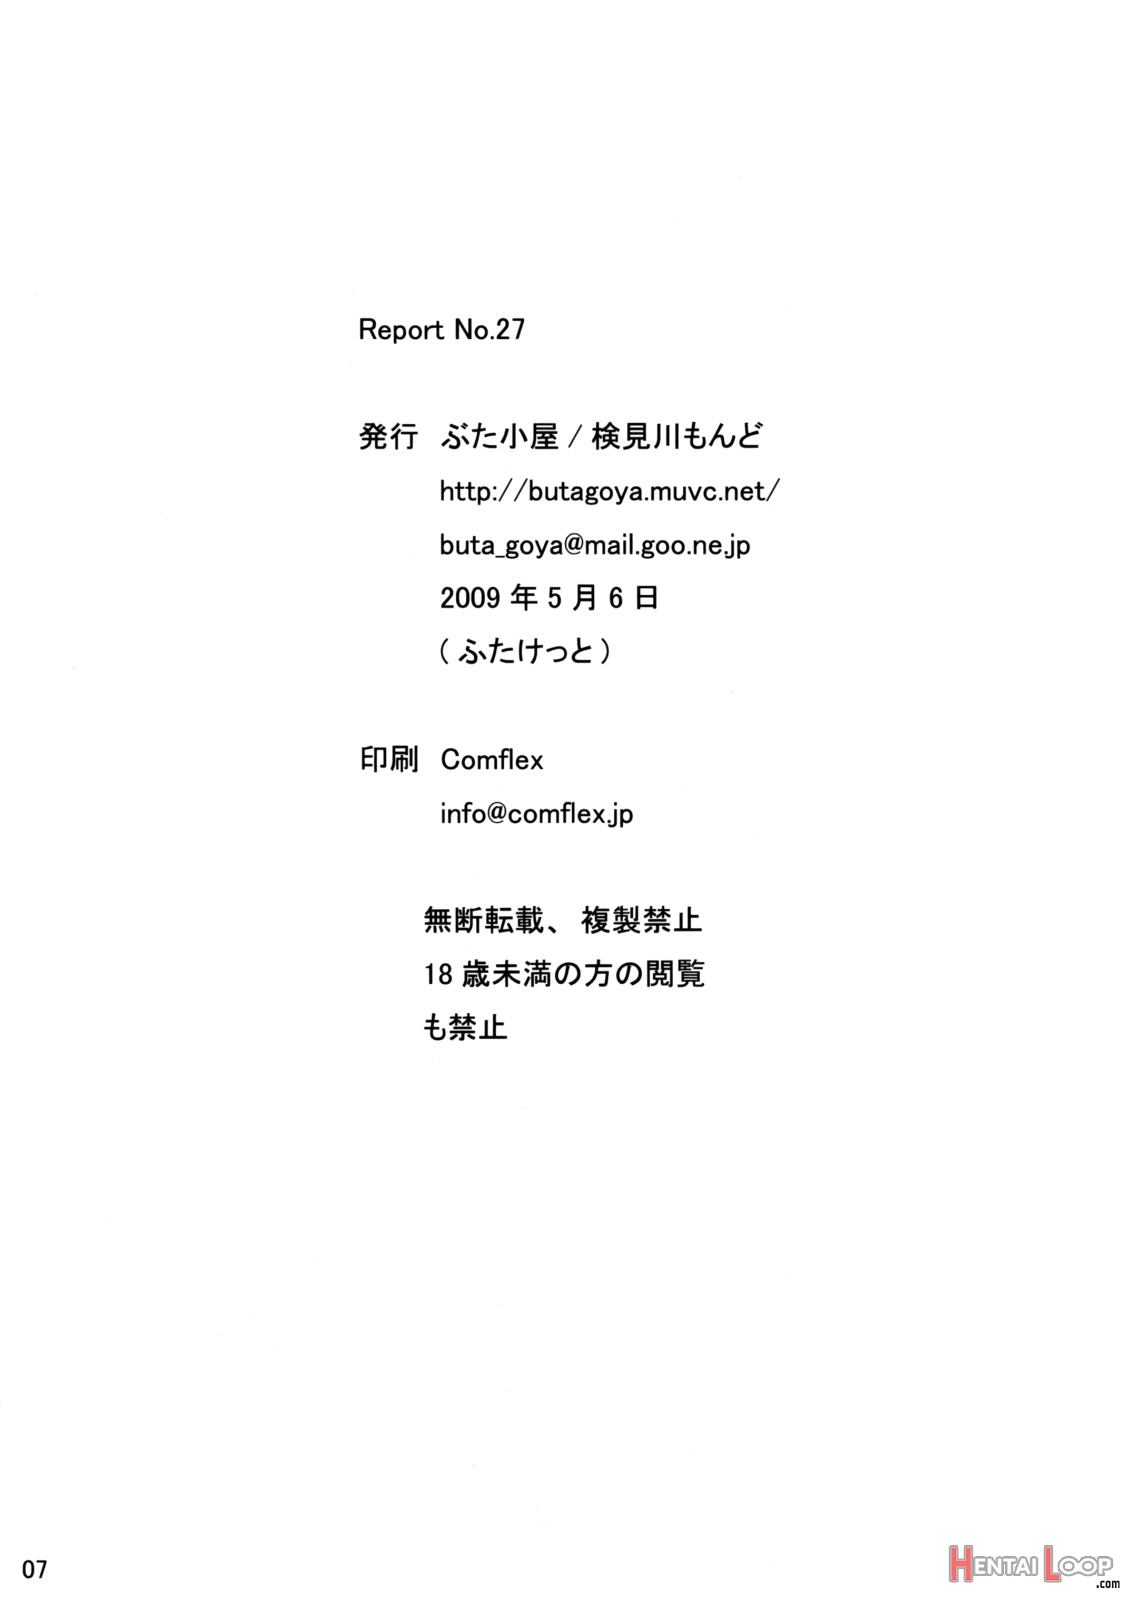 Report No.27 page 7